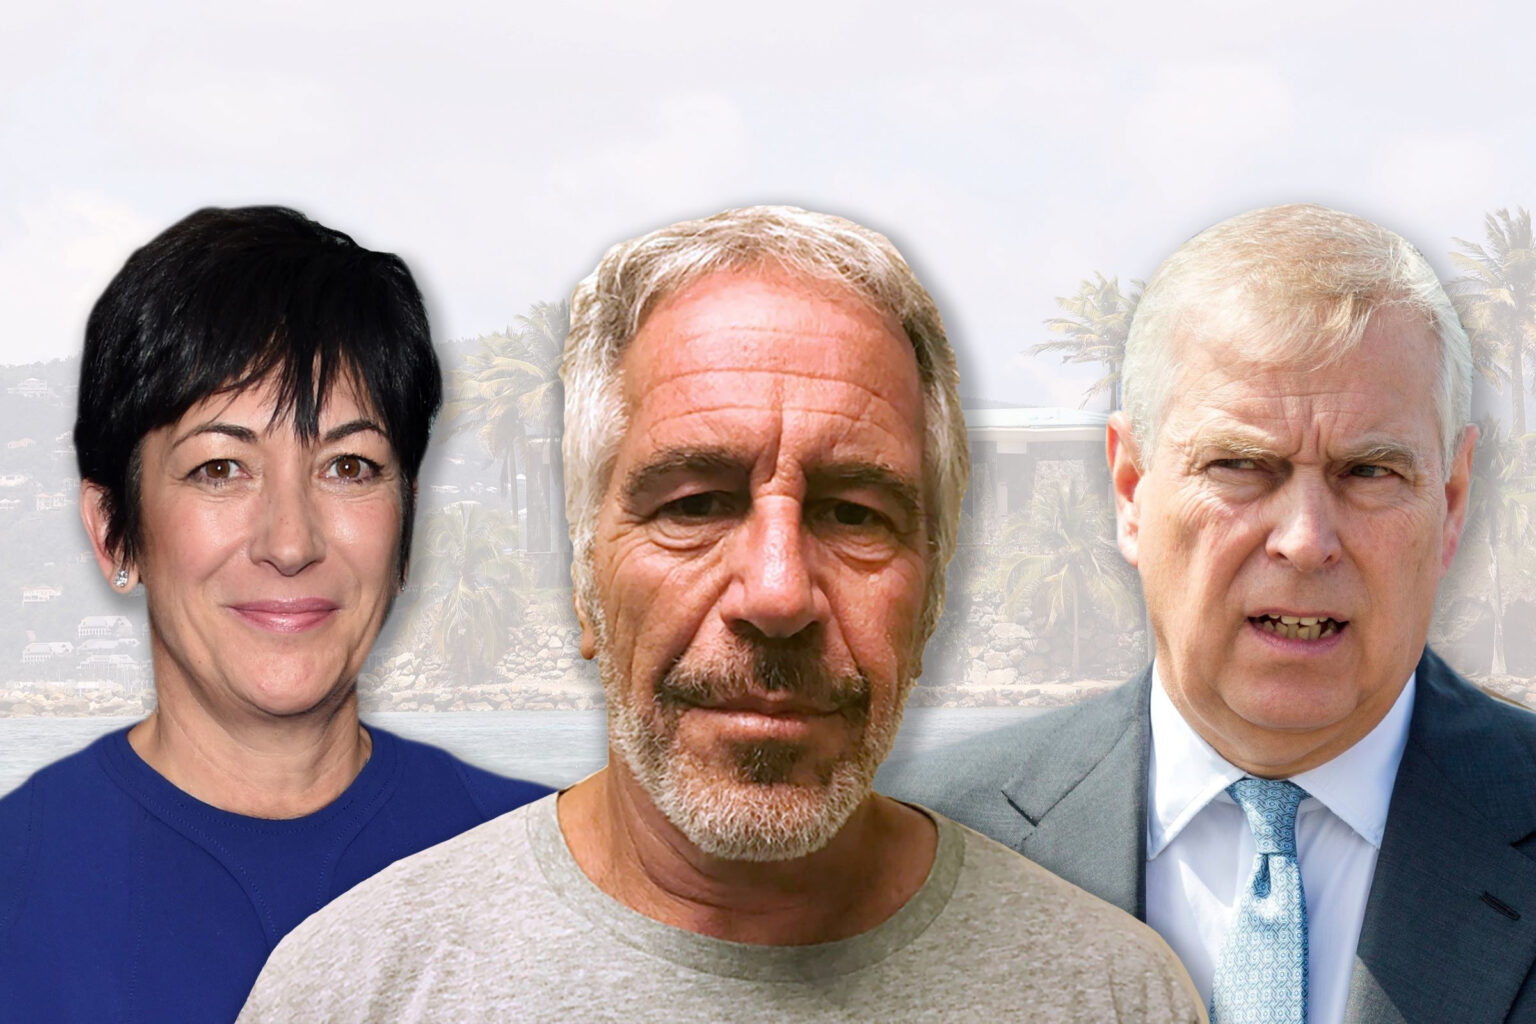 Jeffrey Epstein has a lot of elite friends in his inner circle. The list includes Prince Andrew, Bill Clinton, and many more.